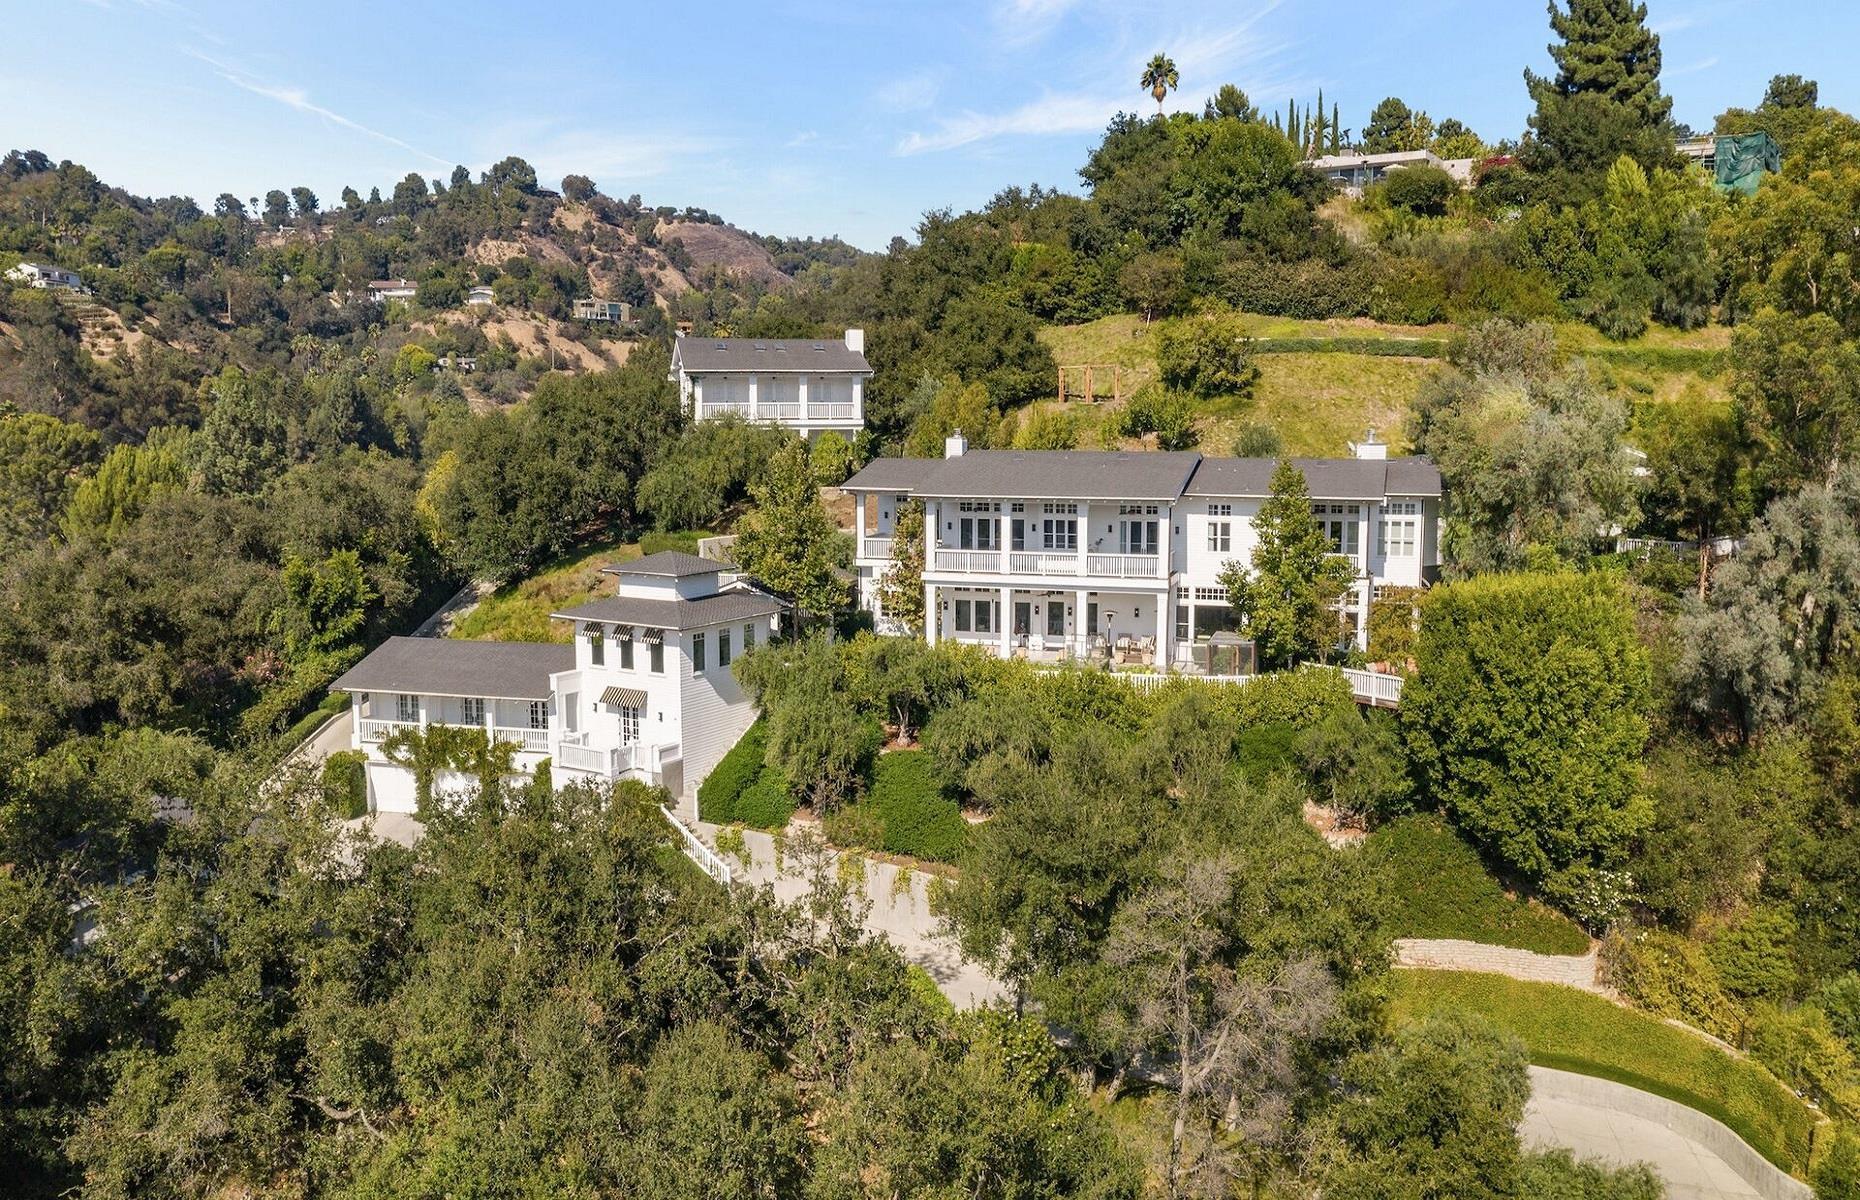 A-list celebrity homes you can rent right now lovemoney